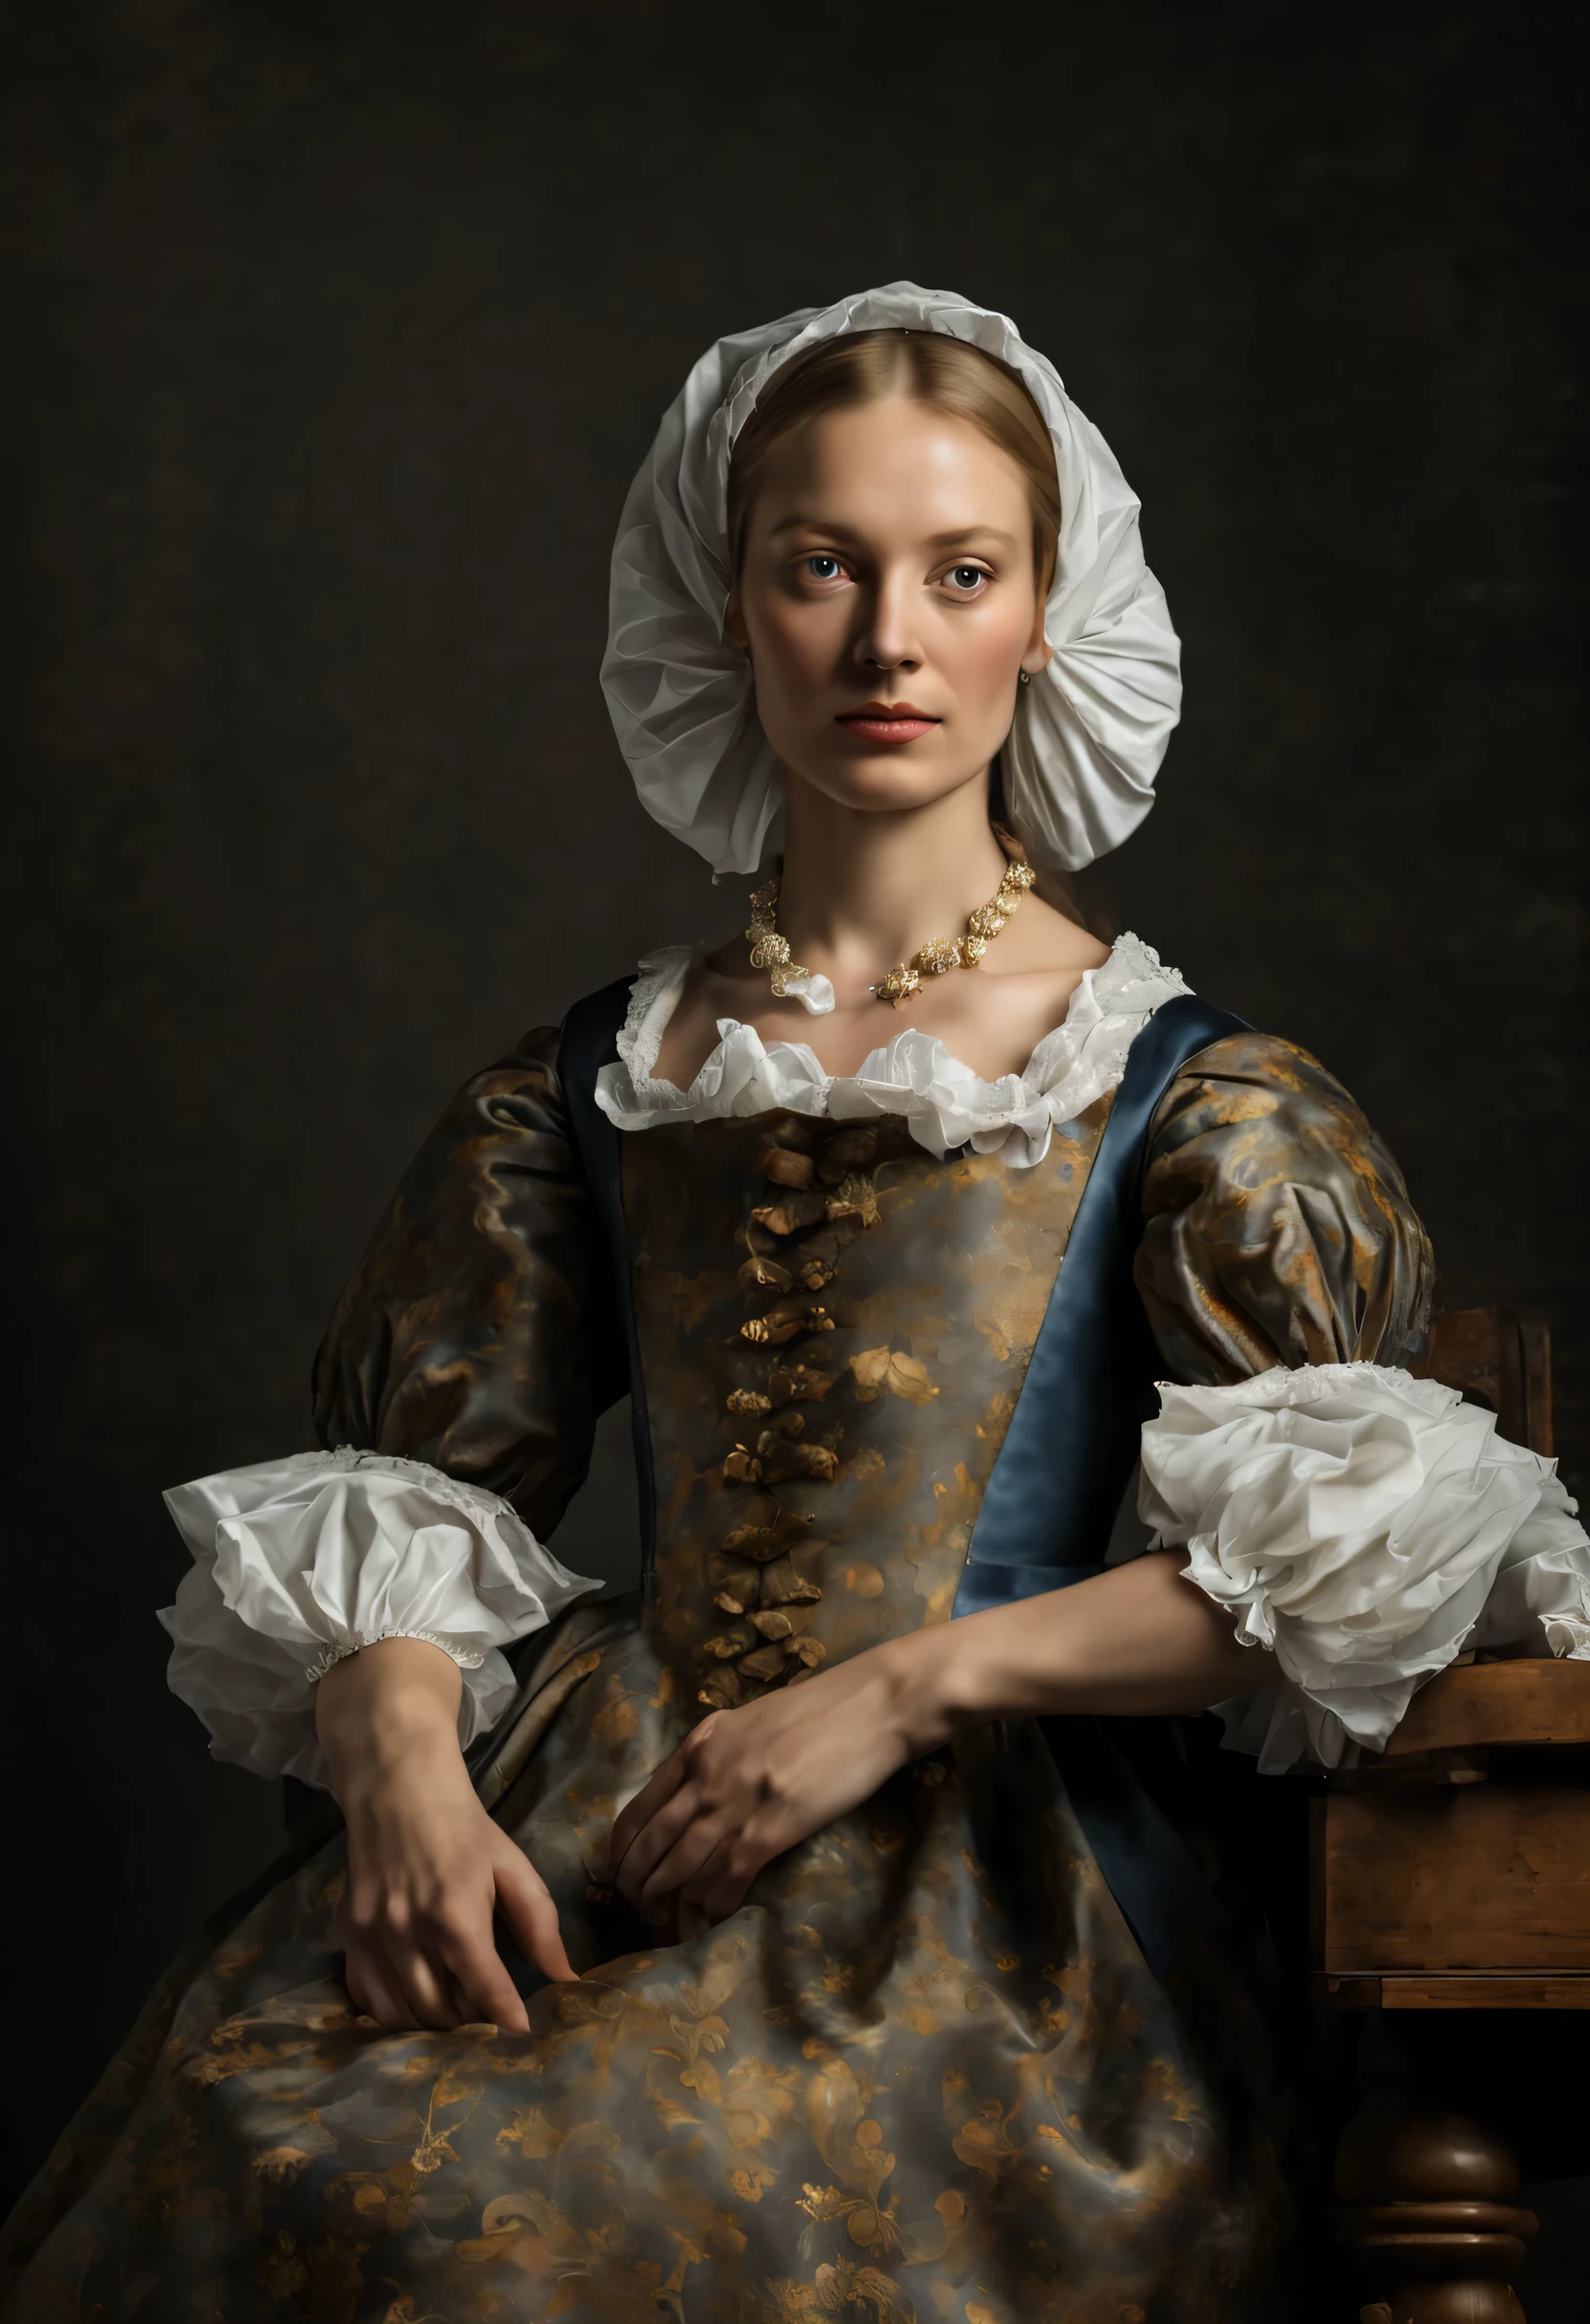 Bust portrait of a Dutch woman from the Netherlands Golden Age.., realistic, Johannes Vermeer style, Rembrandt style, 17th century European girl, on a black background, เด็กสาวชาวดัตช์ที่มีท่าทางmysterious, Dress of the Dutch aristocracy in the 17th century, soft diffused light, Meticulous details, luxurious rooms, European skin color, Facial features, Masterpiece, Timeless, mysterious, shine, Baroque art style, miraculous, --V6 --A1000